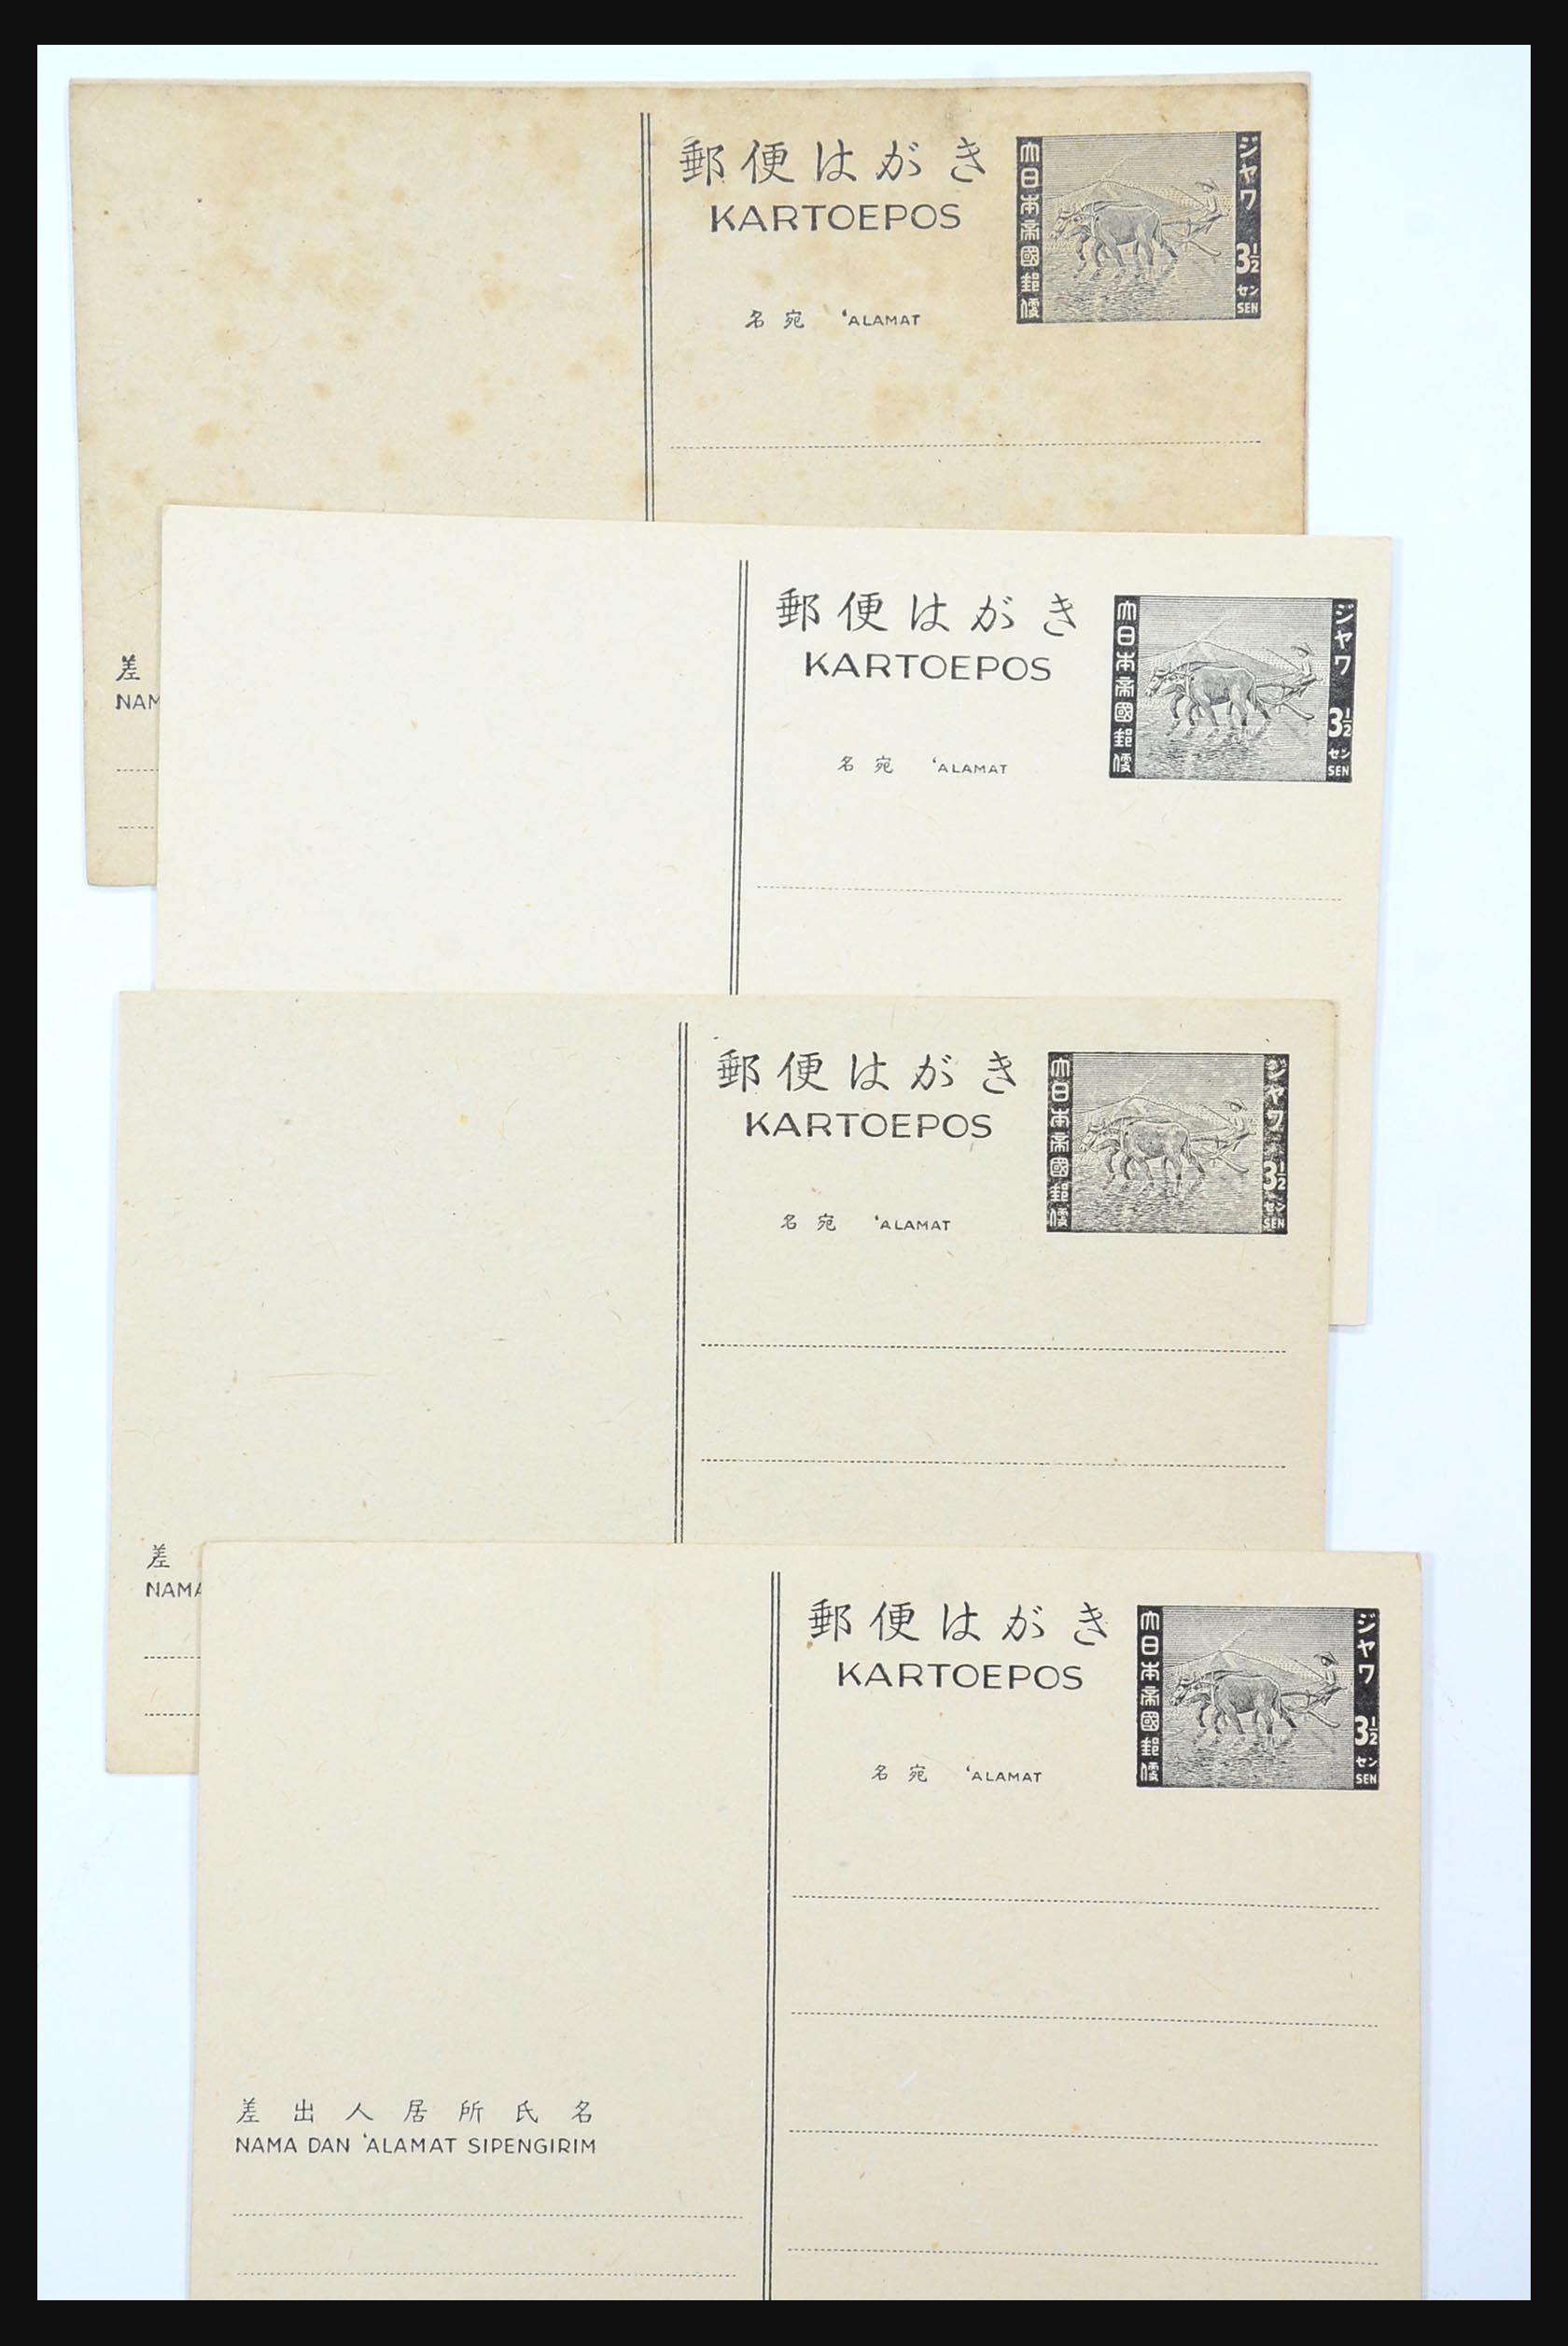 31362 077 - 31362 Netherlands Indies Japanese occupation covers 1942-1945.